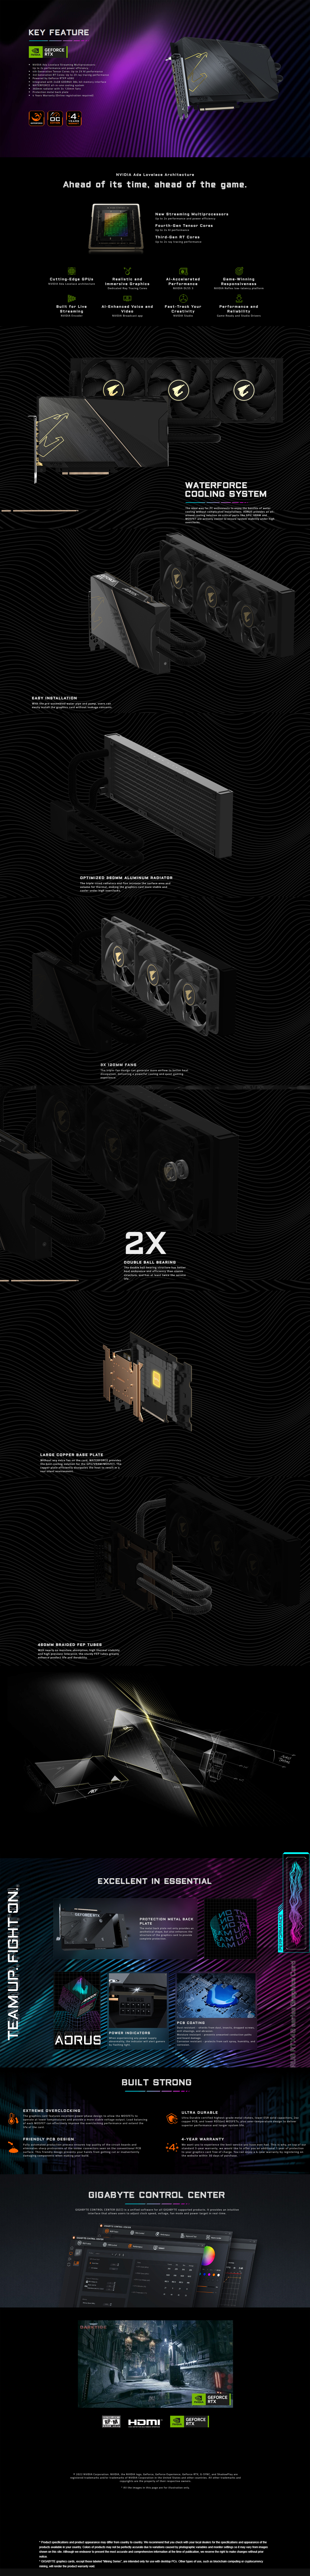 A large marketing image providing additional information about the product Gigabyte GeForce RTX 4090 Aorus Xtreme Waterforce 24GB GDDR6X - Additional alt info not provided